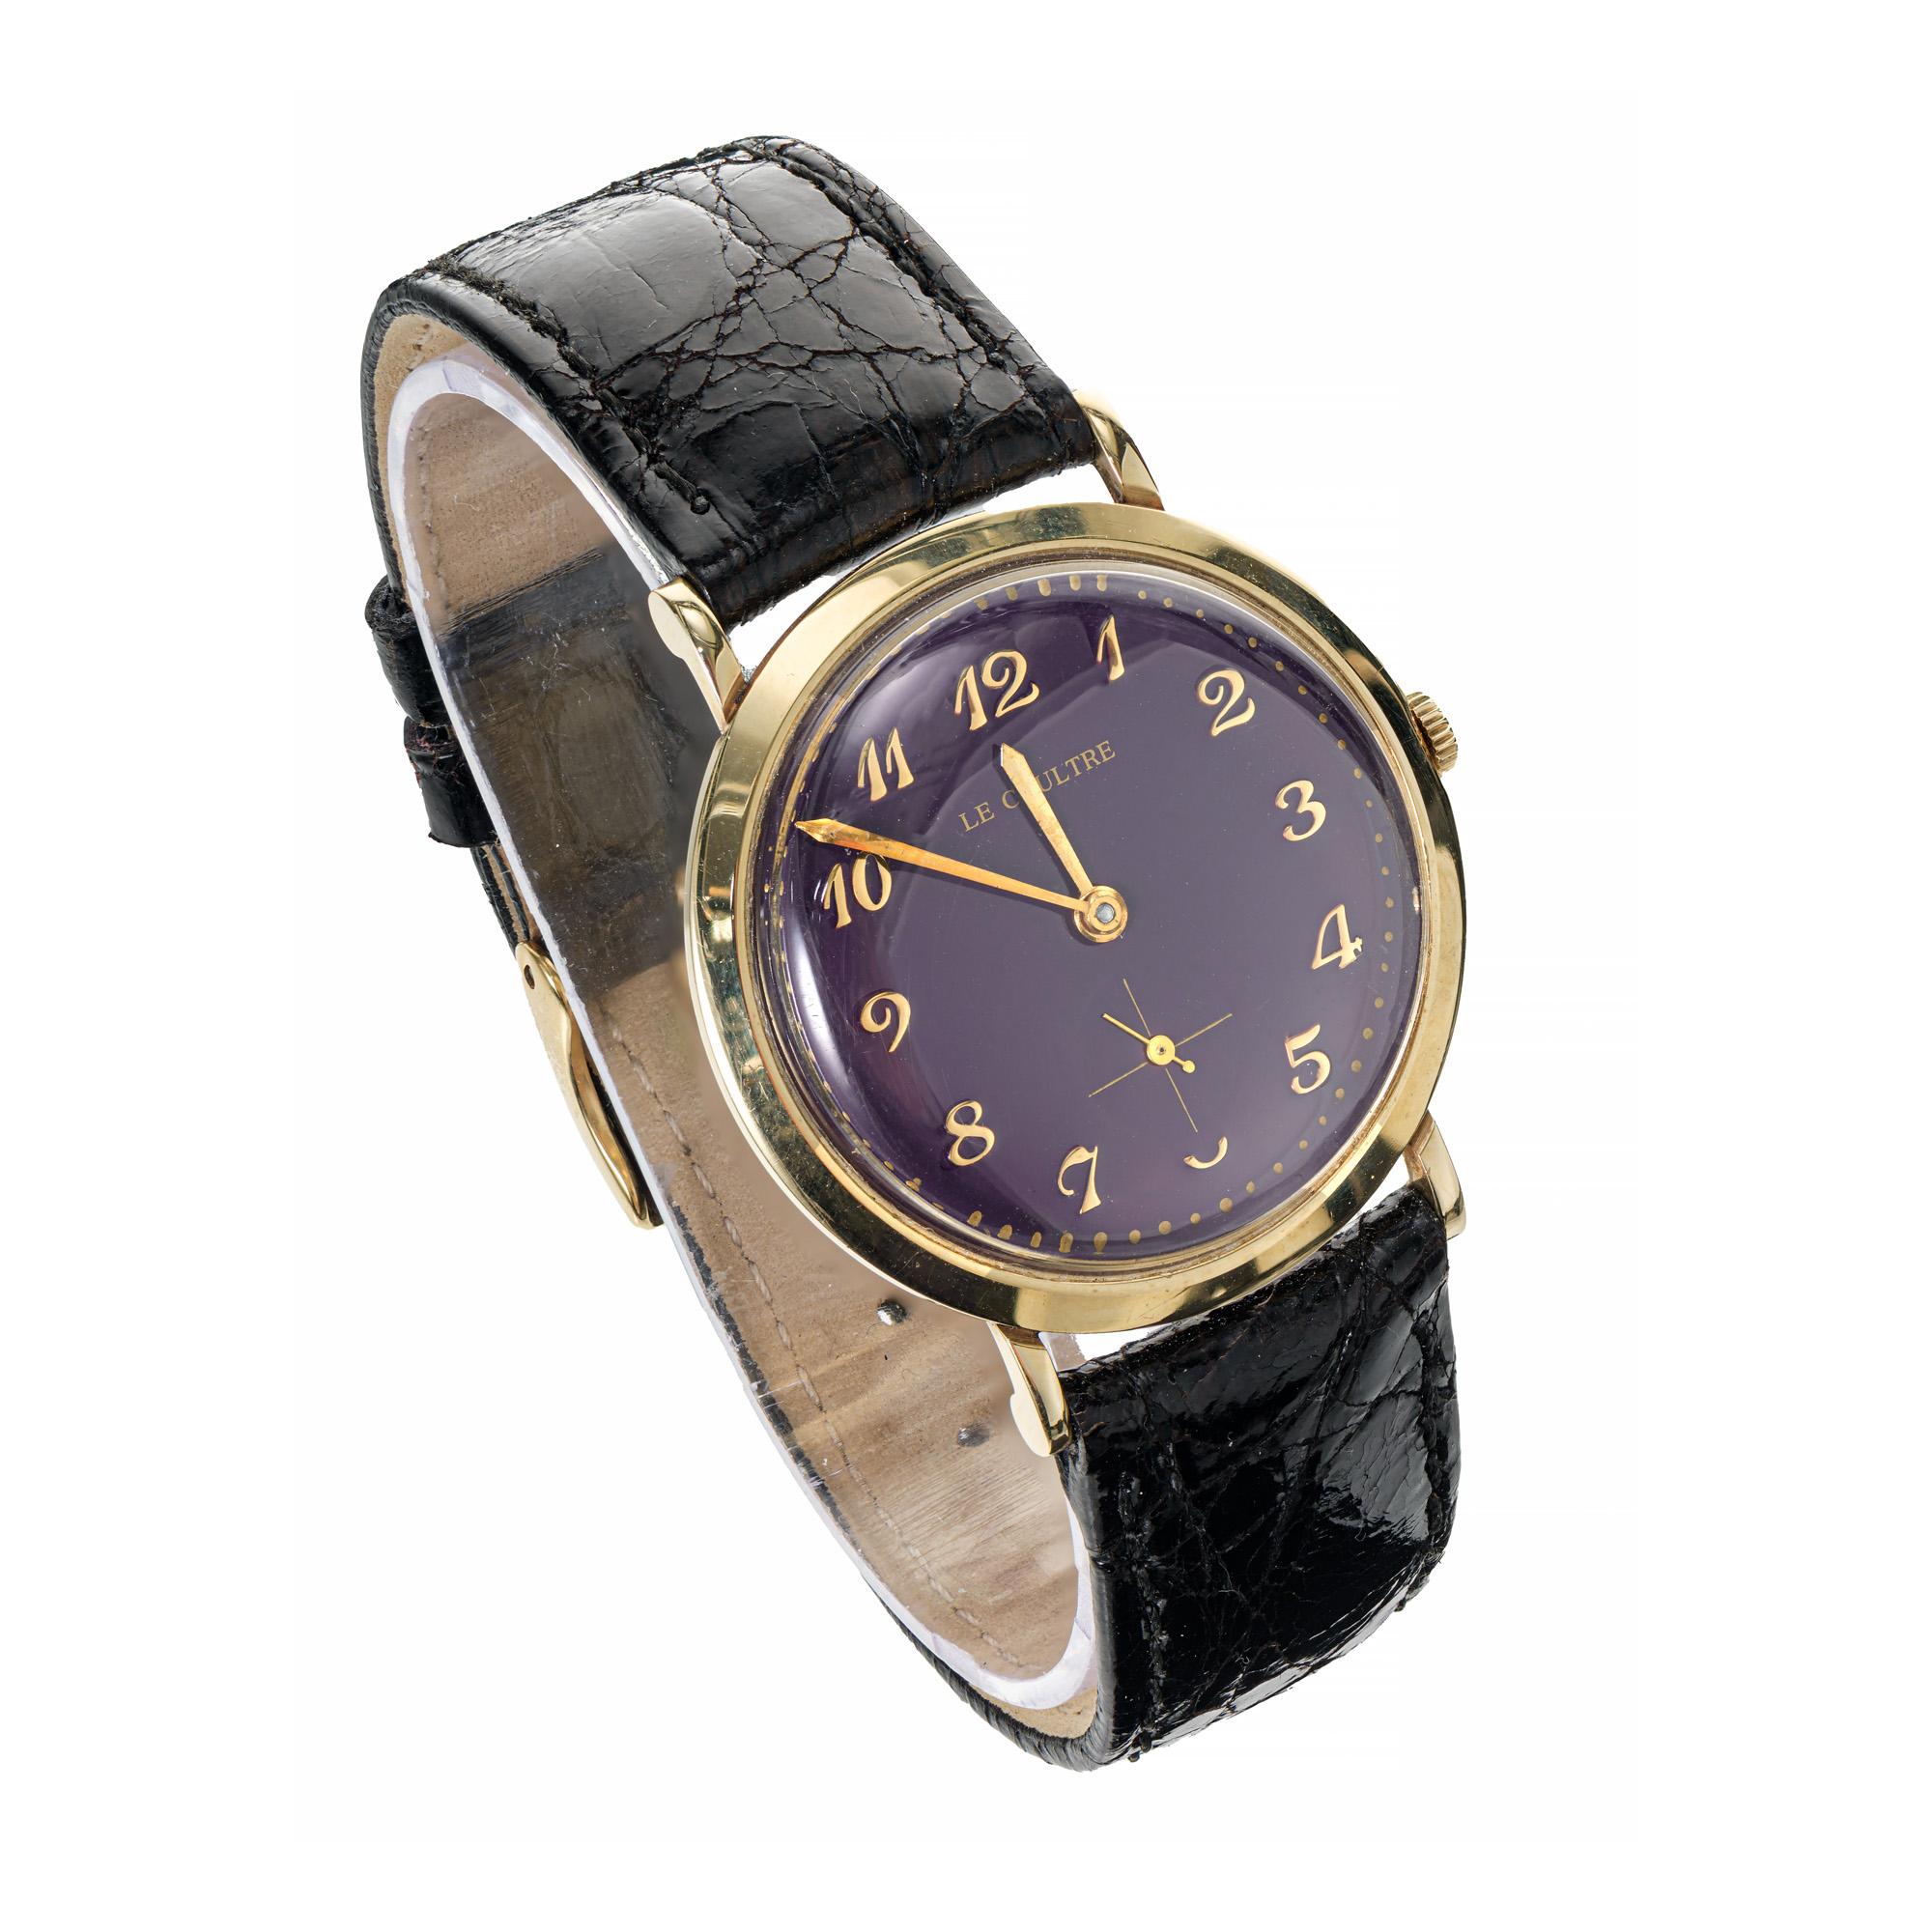 1960's LeCoultre 14k yellow gold wristwatch with custom-colored bright deep purple dial wristwatch. Classic LeCoultre men's wristwatch, with gold bezel and refinished, custom colored dial. Color not original to watch. Black strap. 

14k yellow